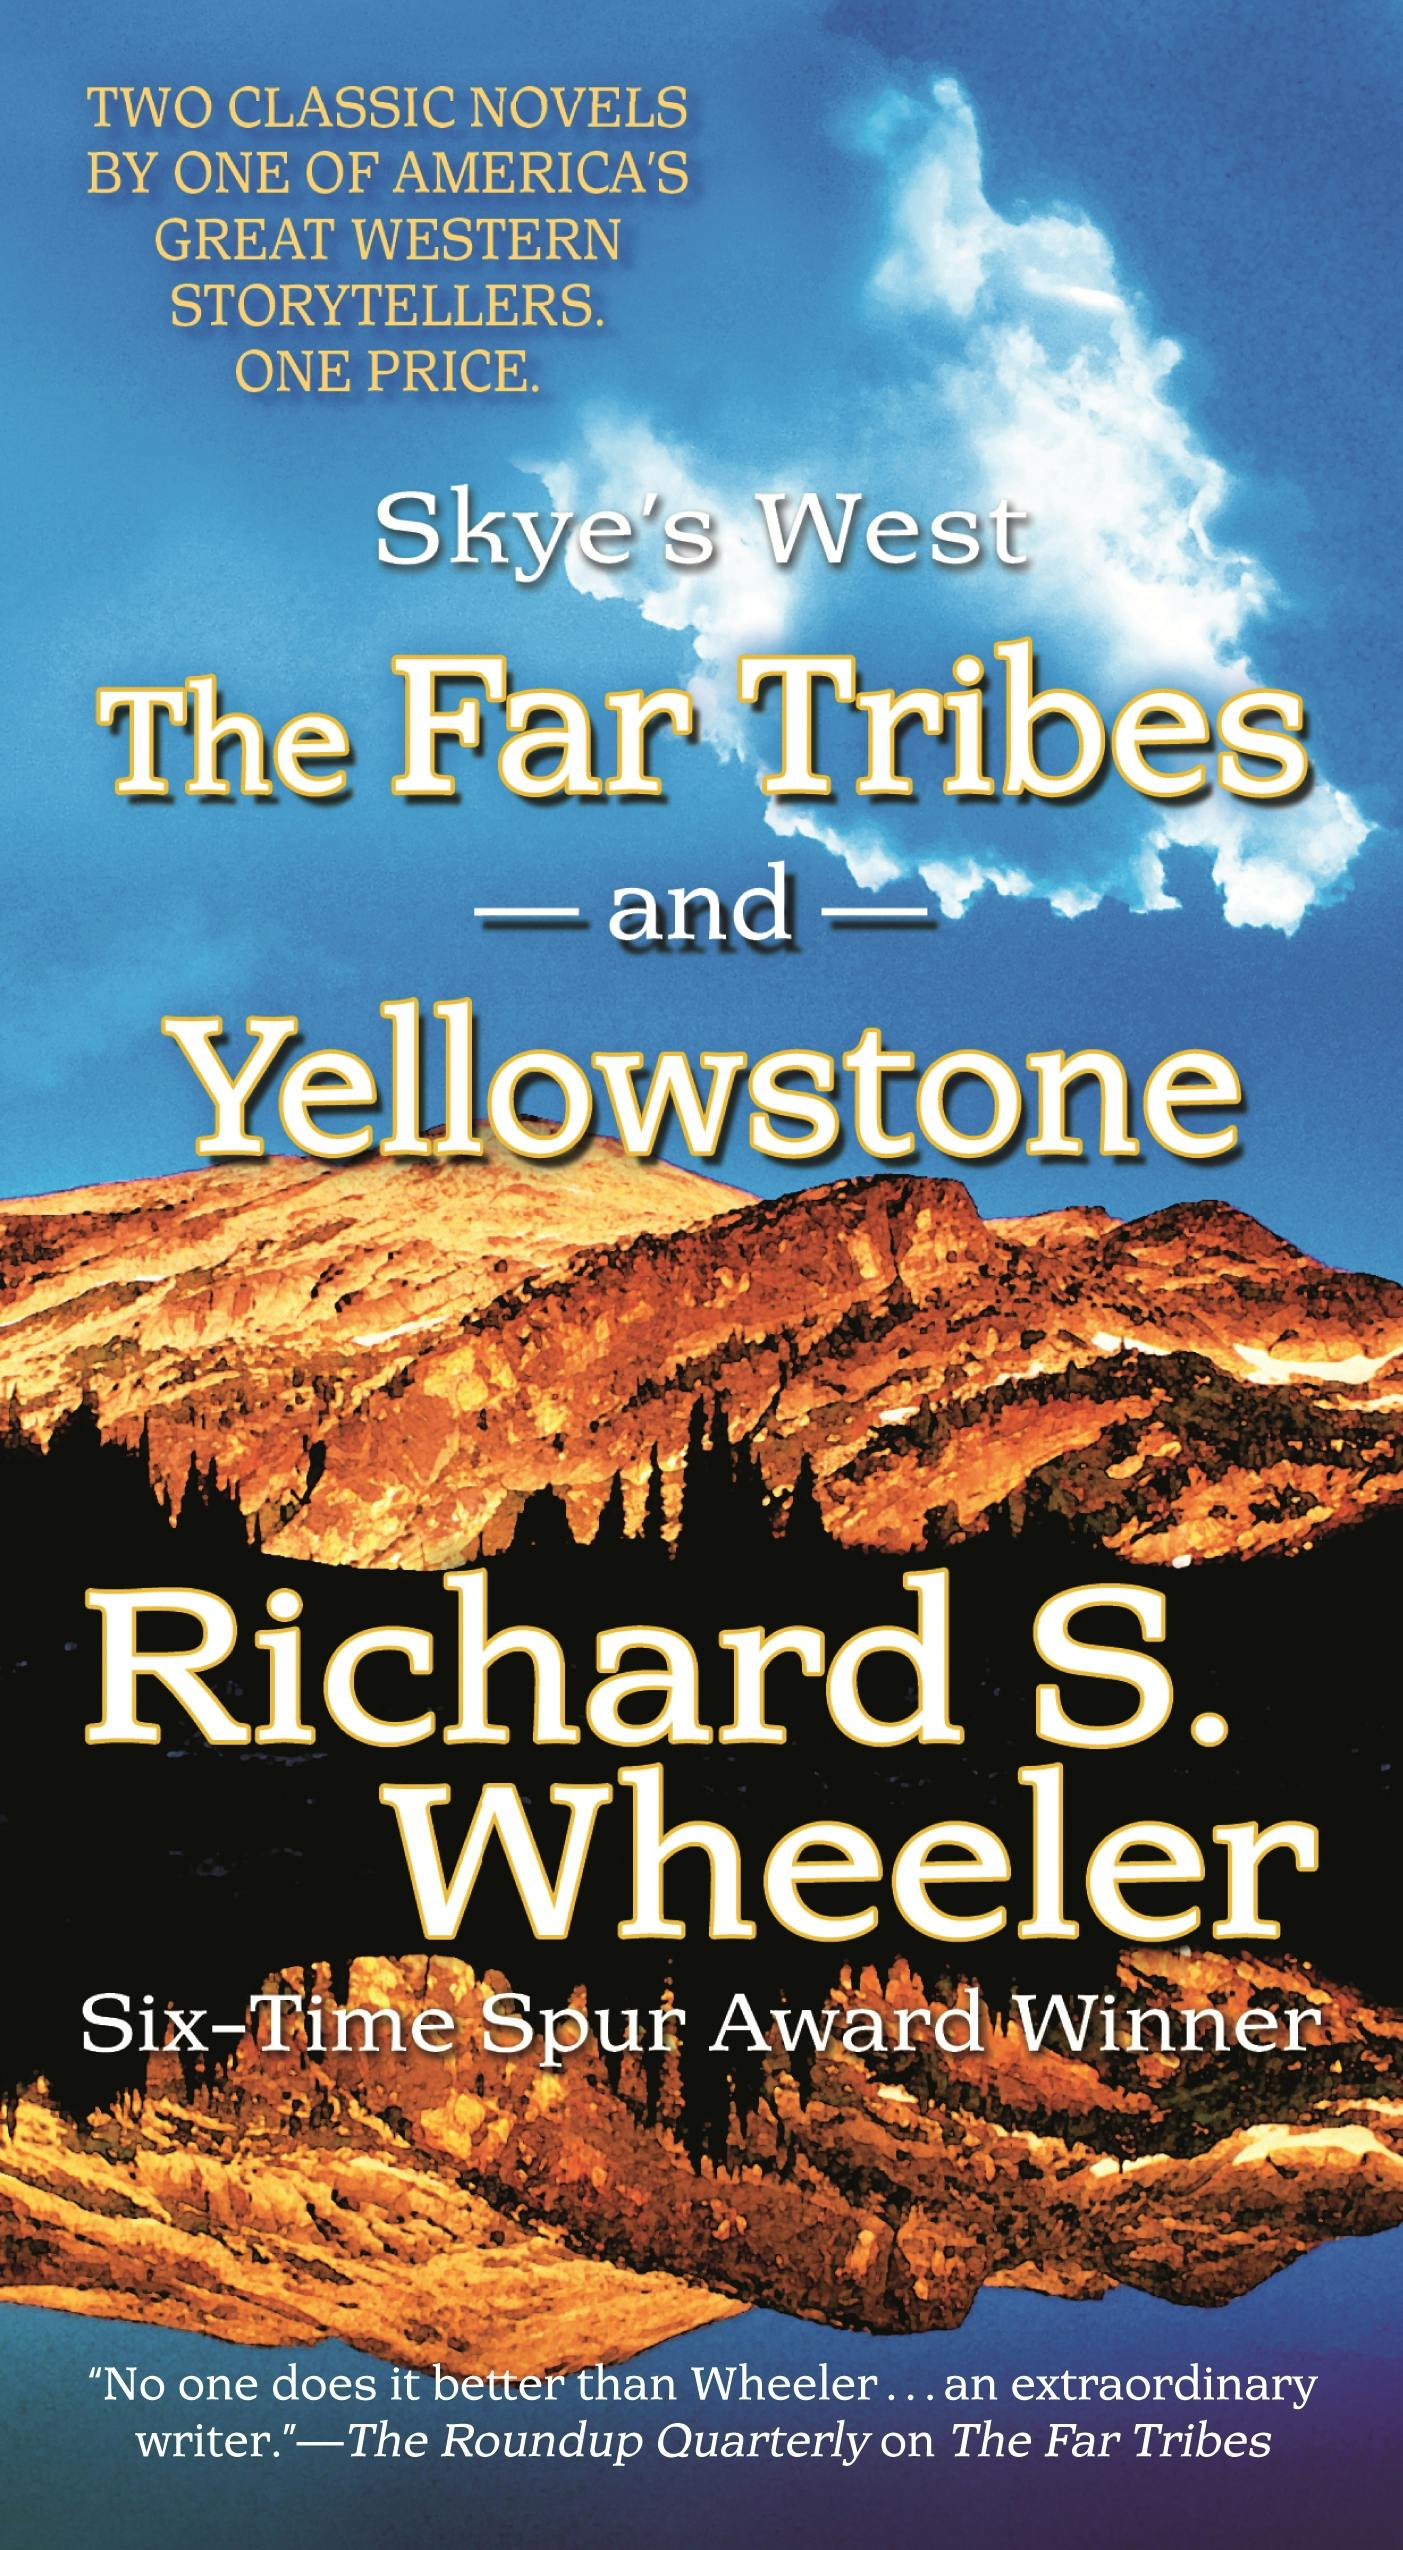 Cover for the book titled as: The Far Tribes and Yellowstone